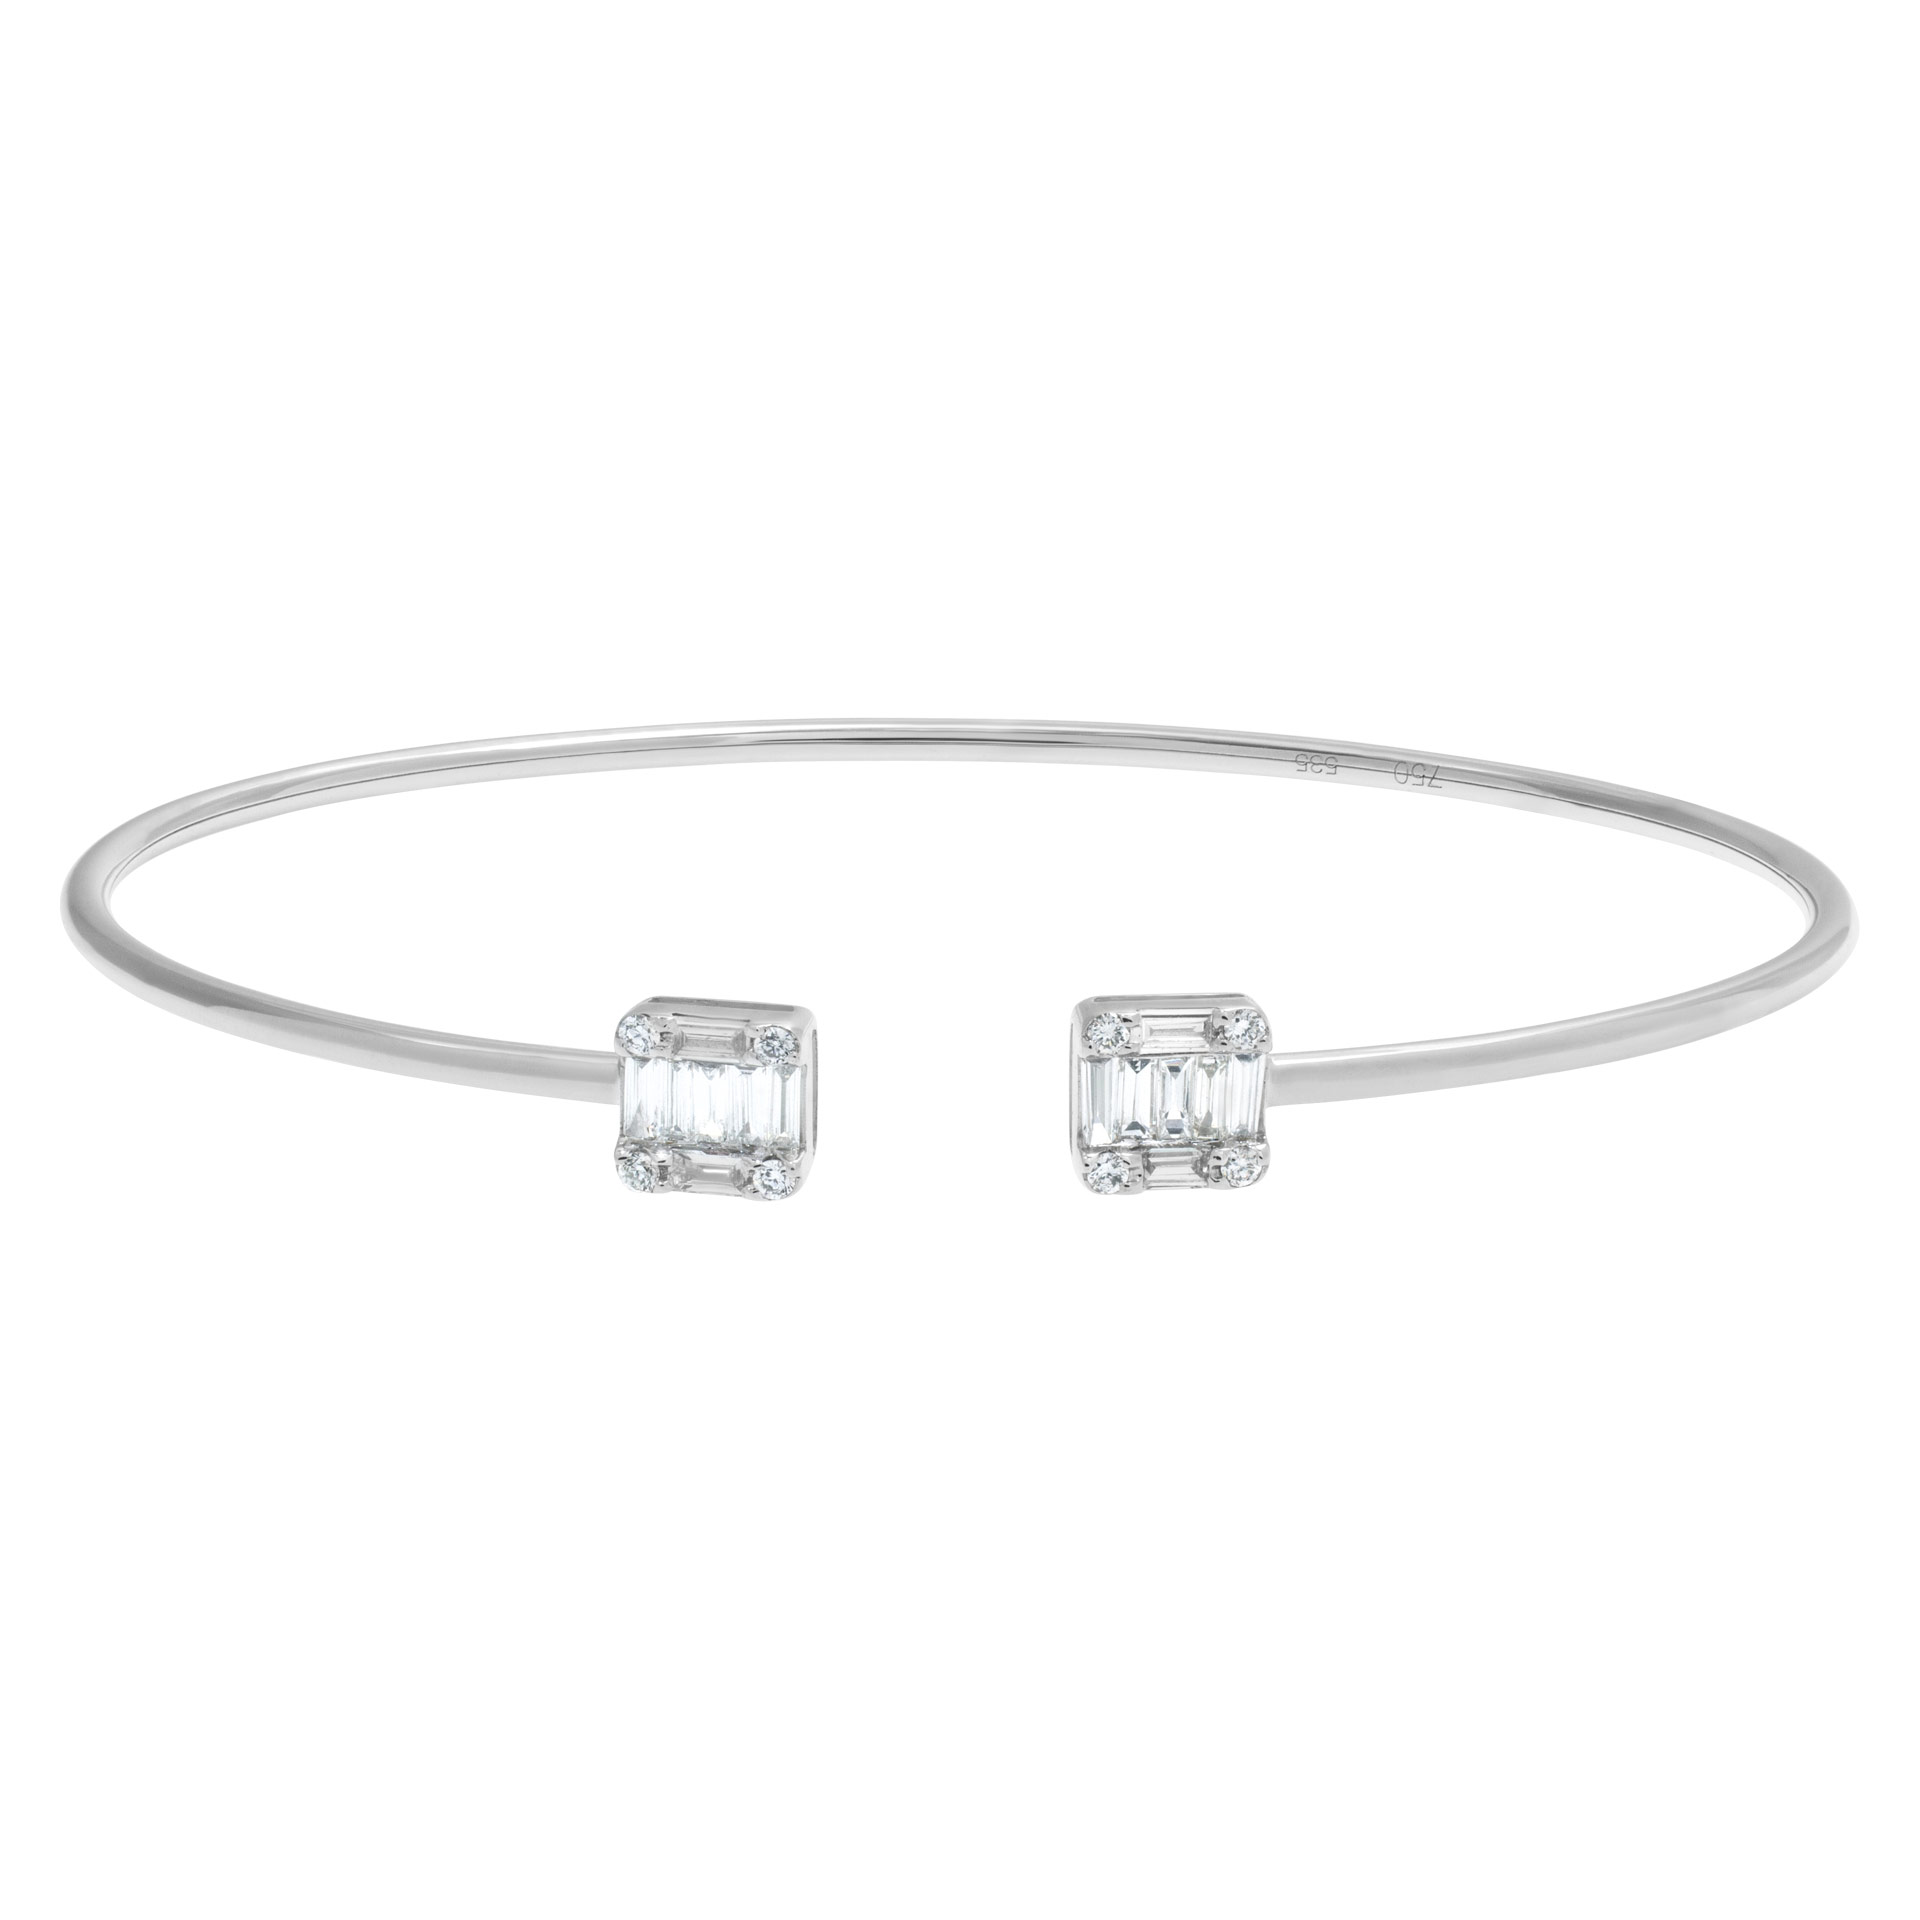 Diamond bangle with approximately 0.50 carats in diamonds in 18k white gold